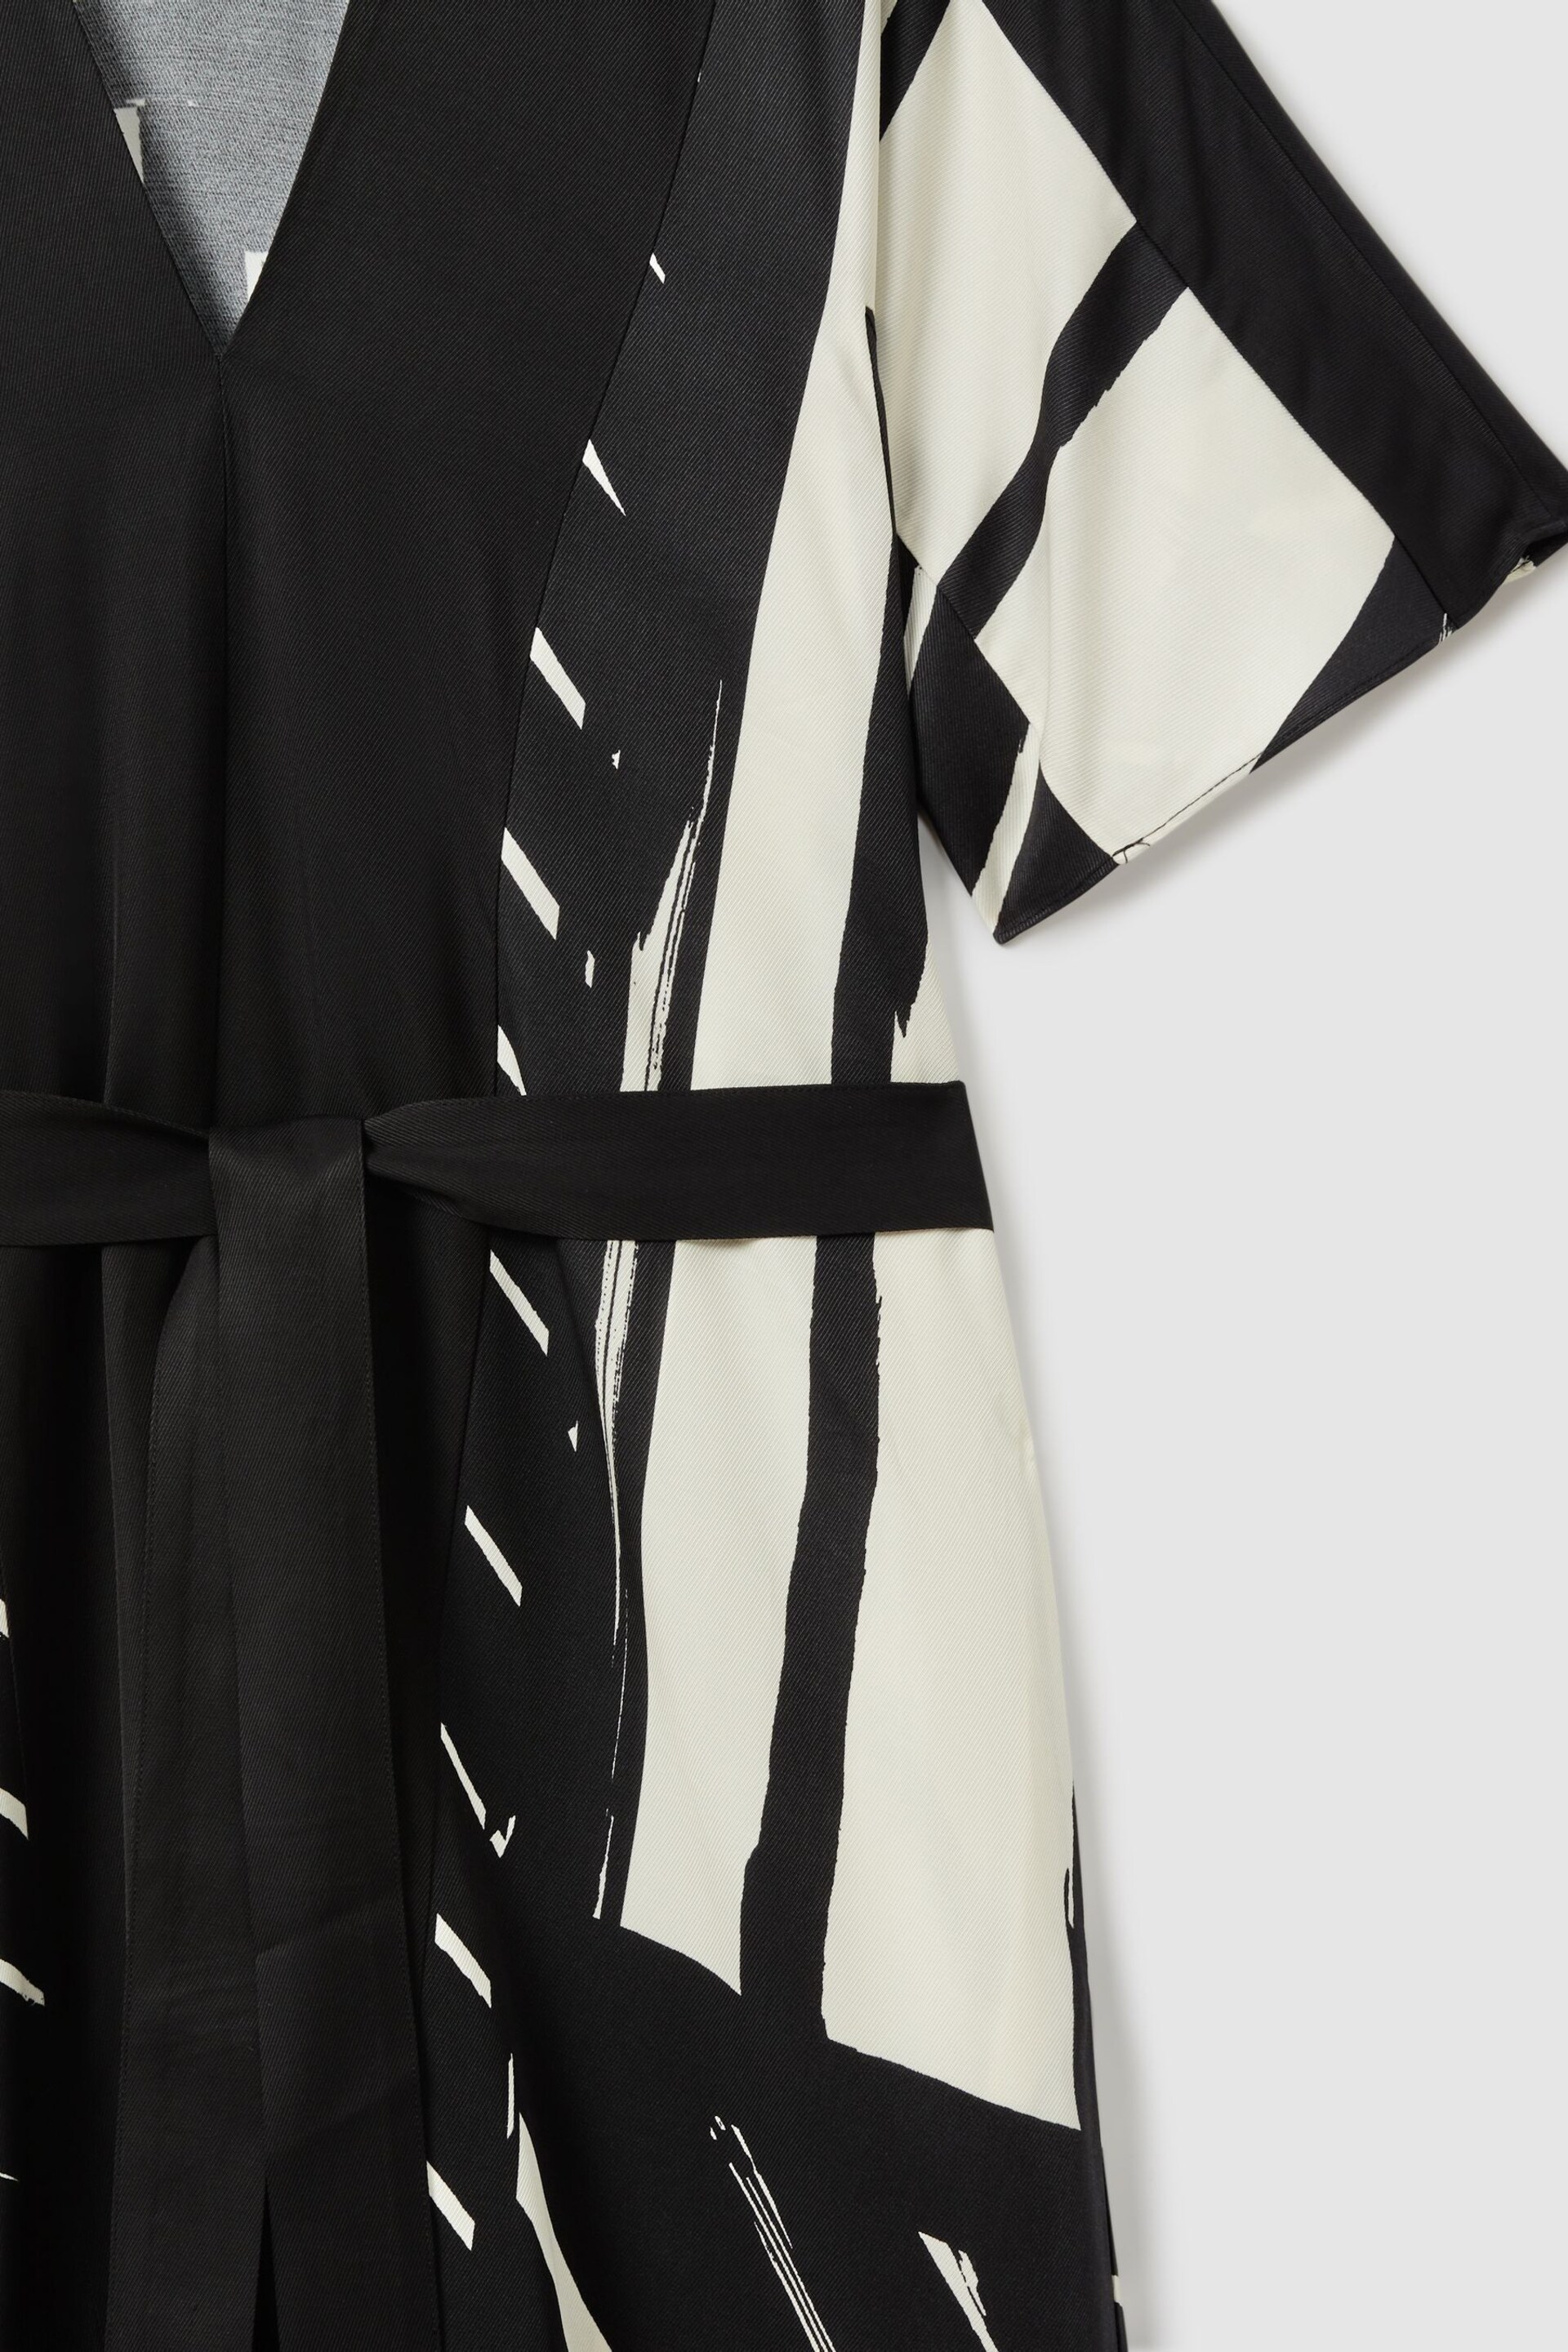 Reiss Black/White Cami Printed Fit and Flare Midi Dress - Image 7 of 7